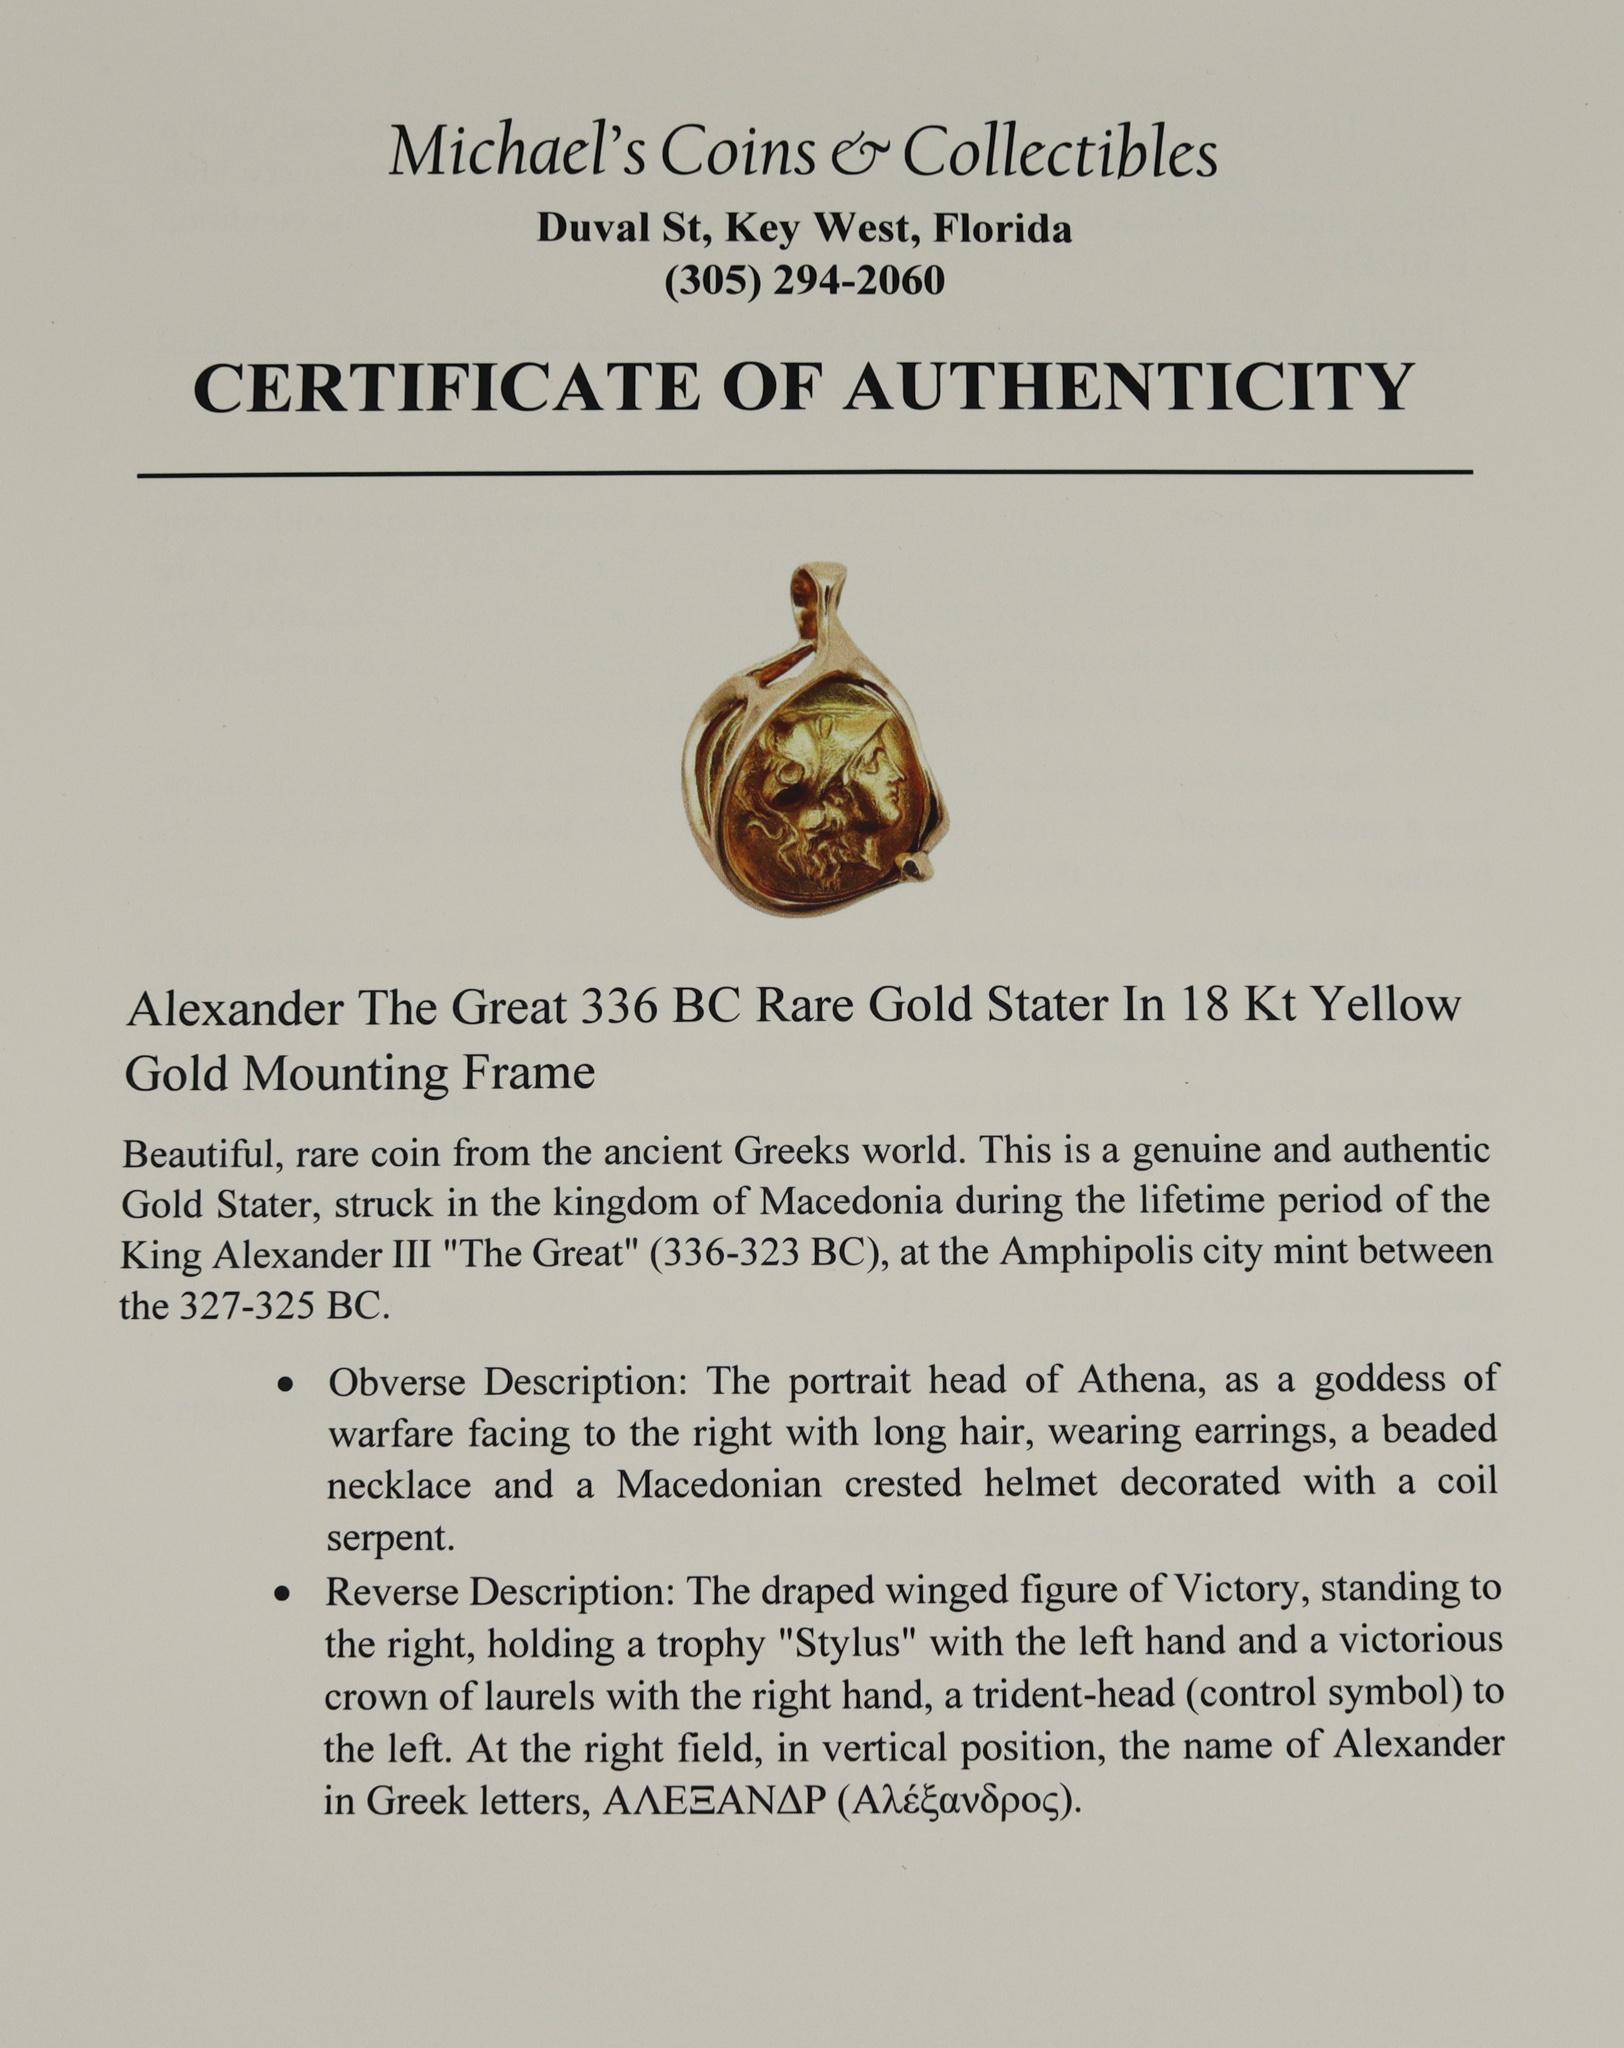 Alexander the Great 336 BC Rare Gold Stater Coin Mount in 18kt Yellow Gold Frame 2